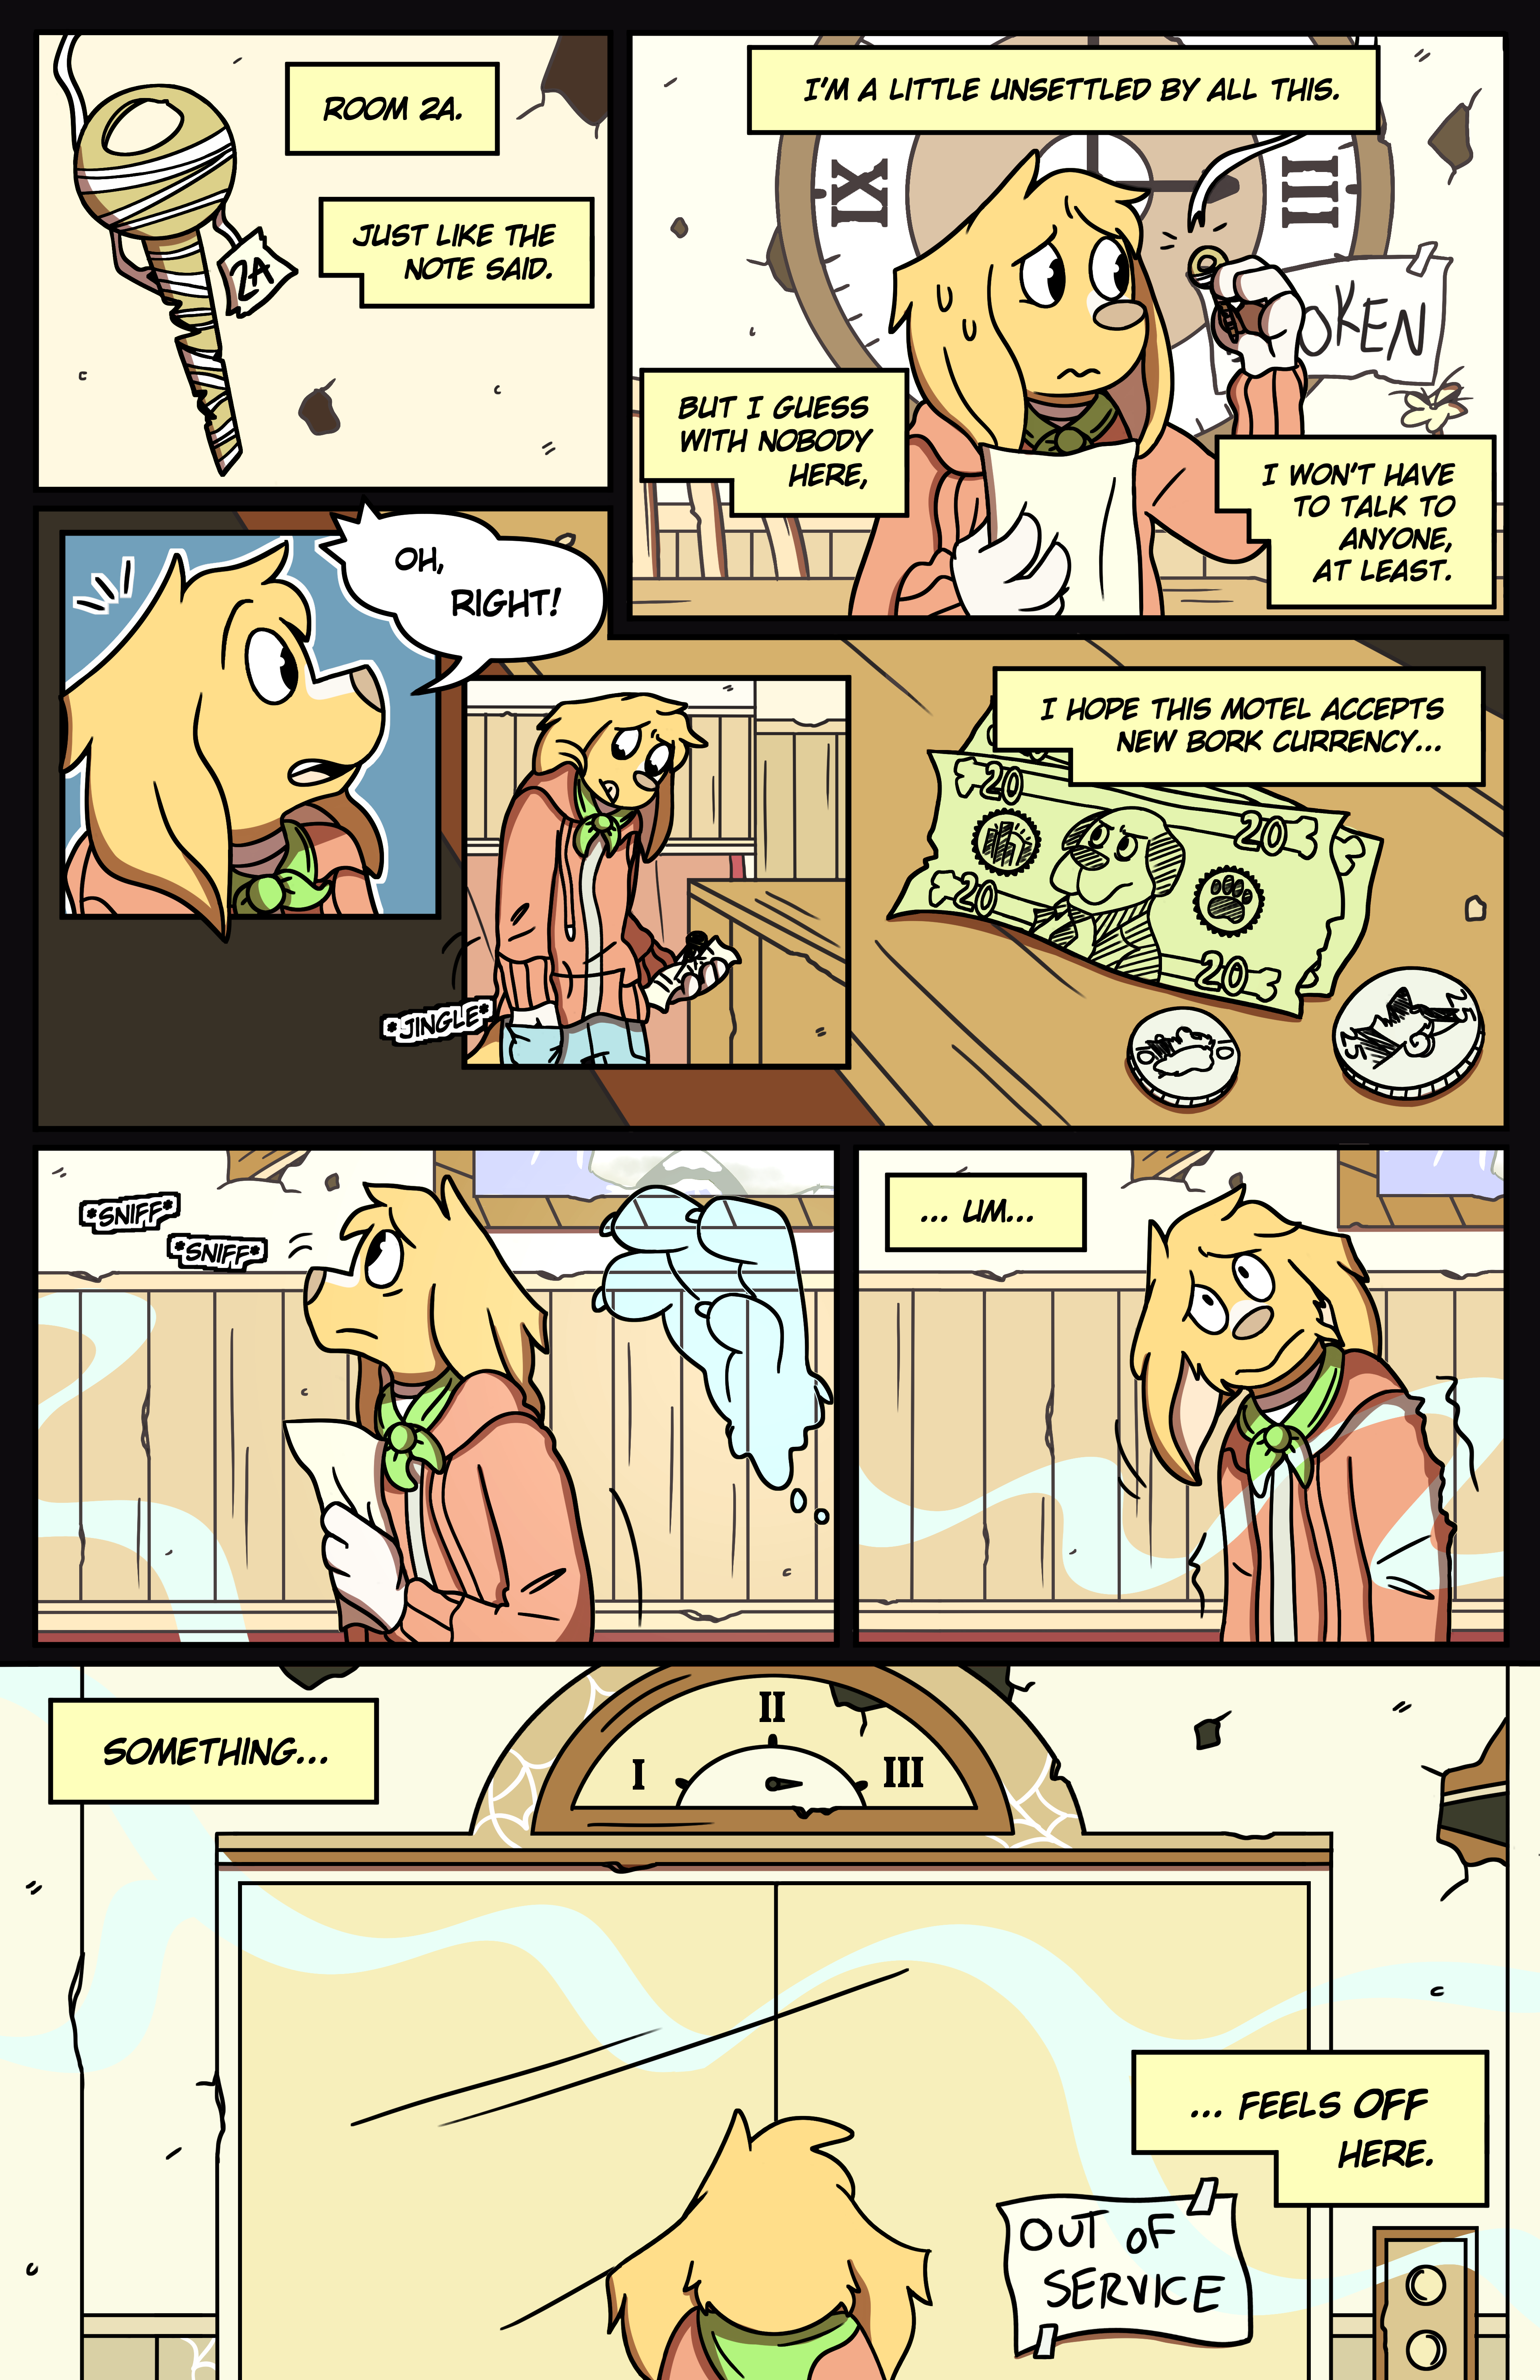 Page 1.16: Out of Service